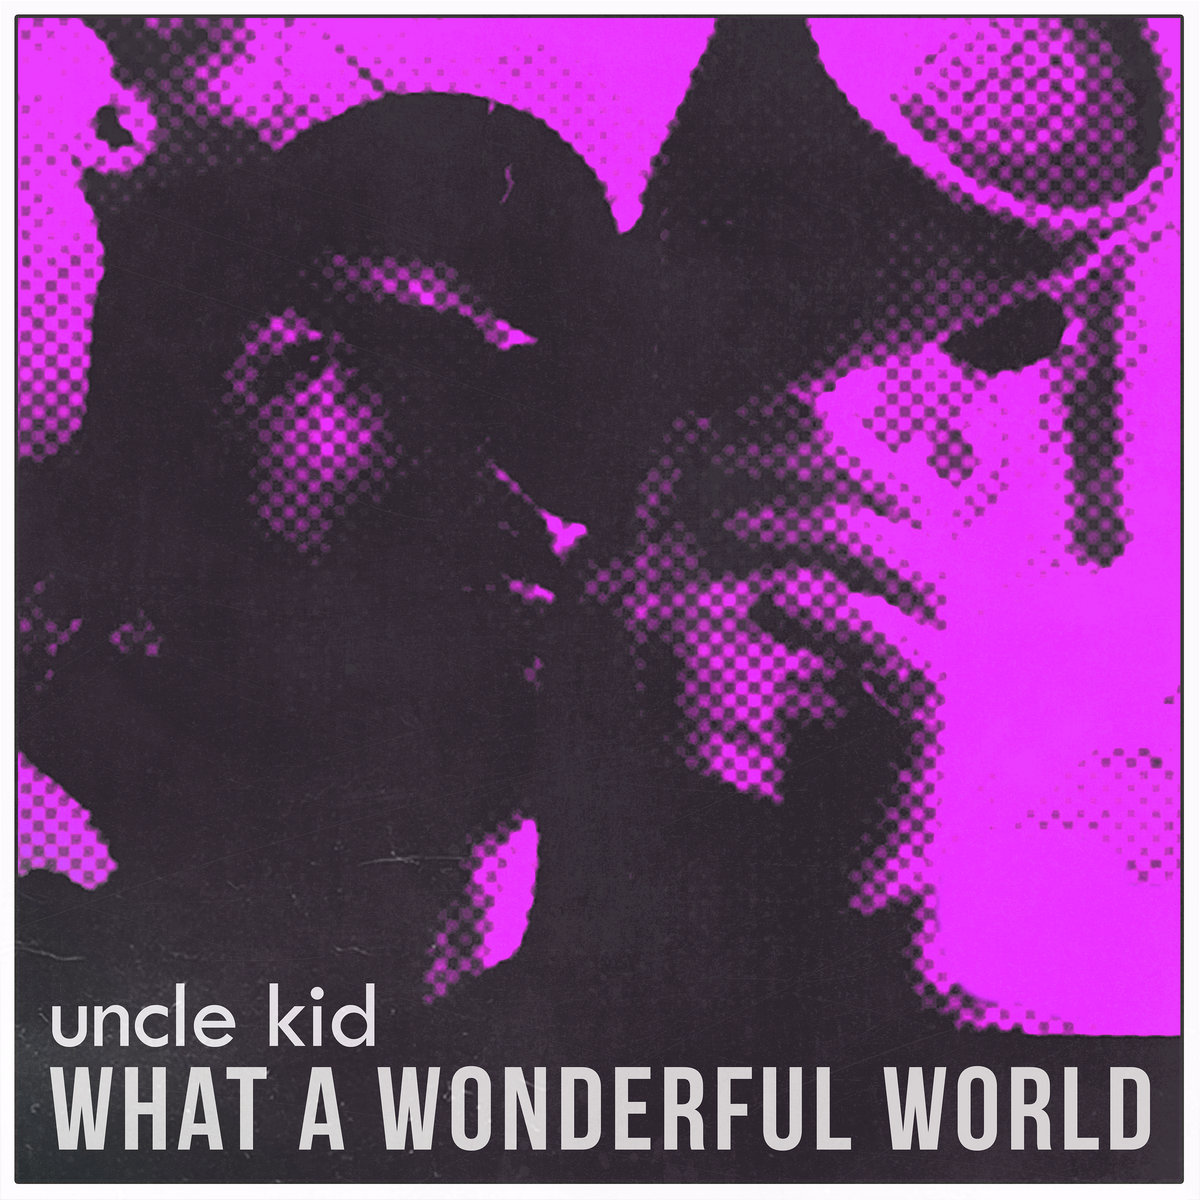 UNCLE KID – WHAT A WONDERFUL WORLD